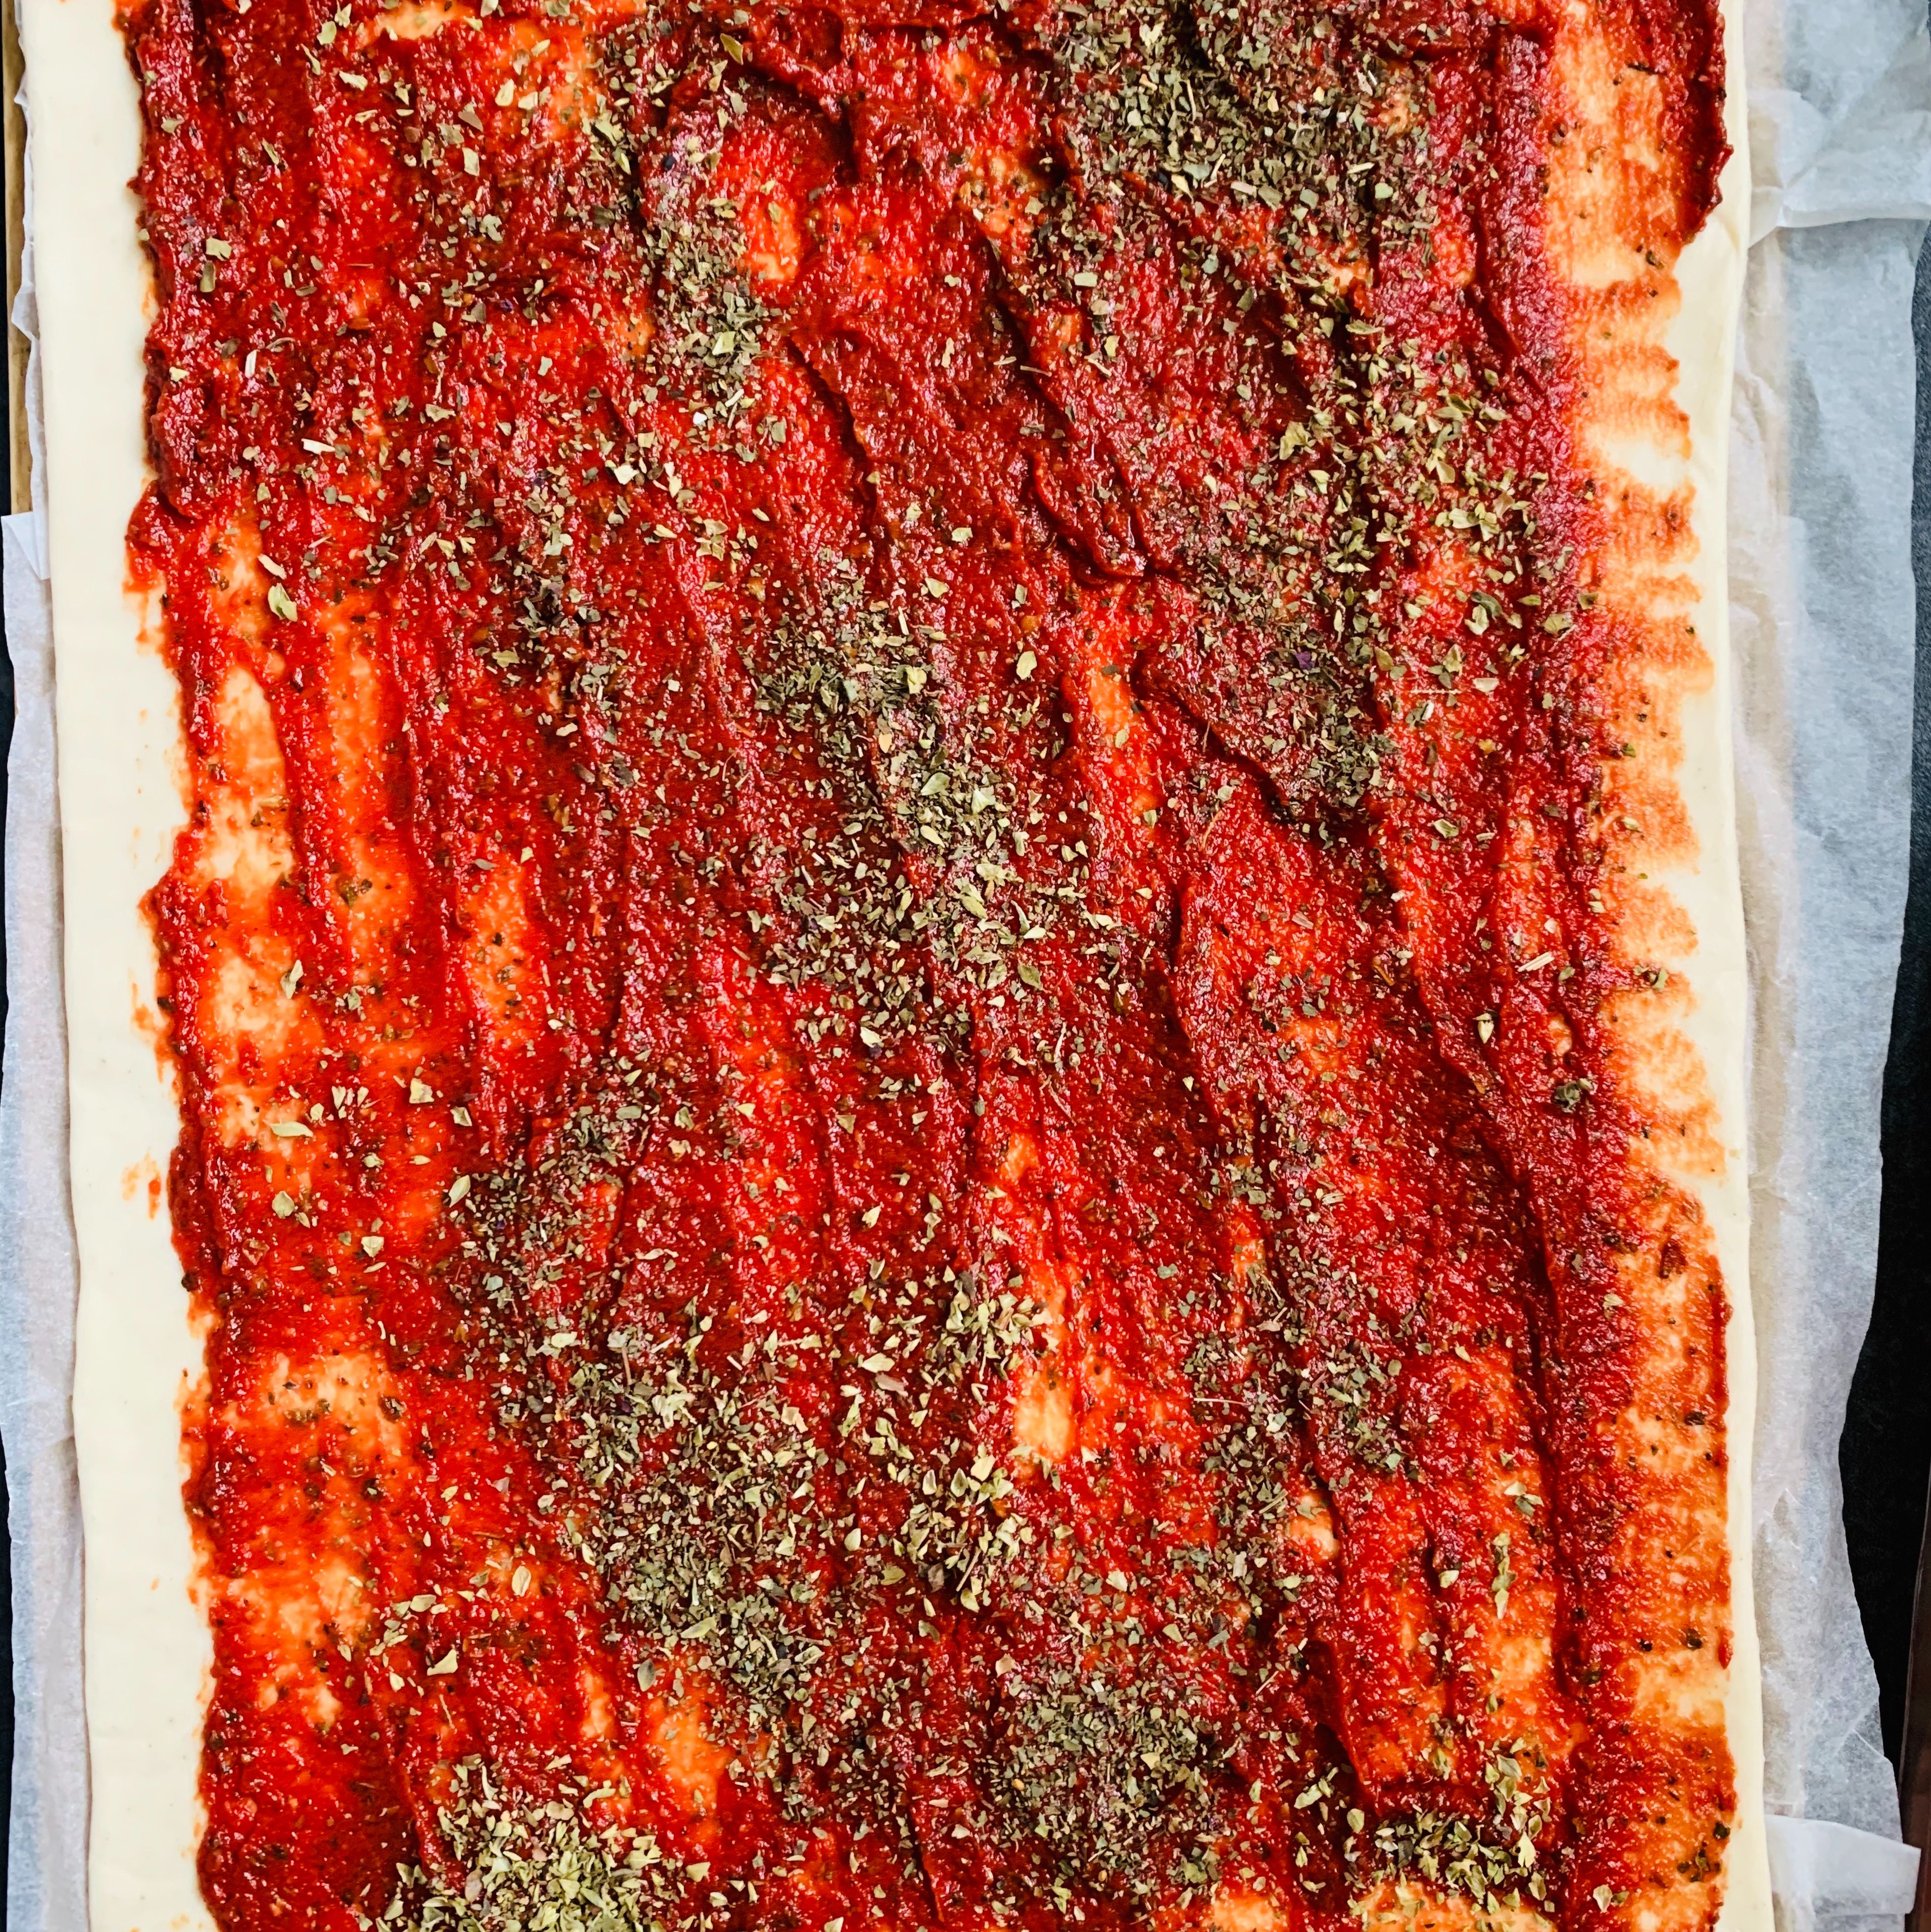 Open up the pizza dough and spread the tomato purée mix all over it. Sprinkle some more herbs over it. 